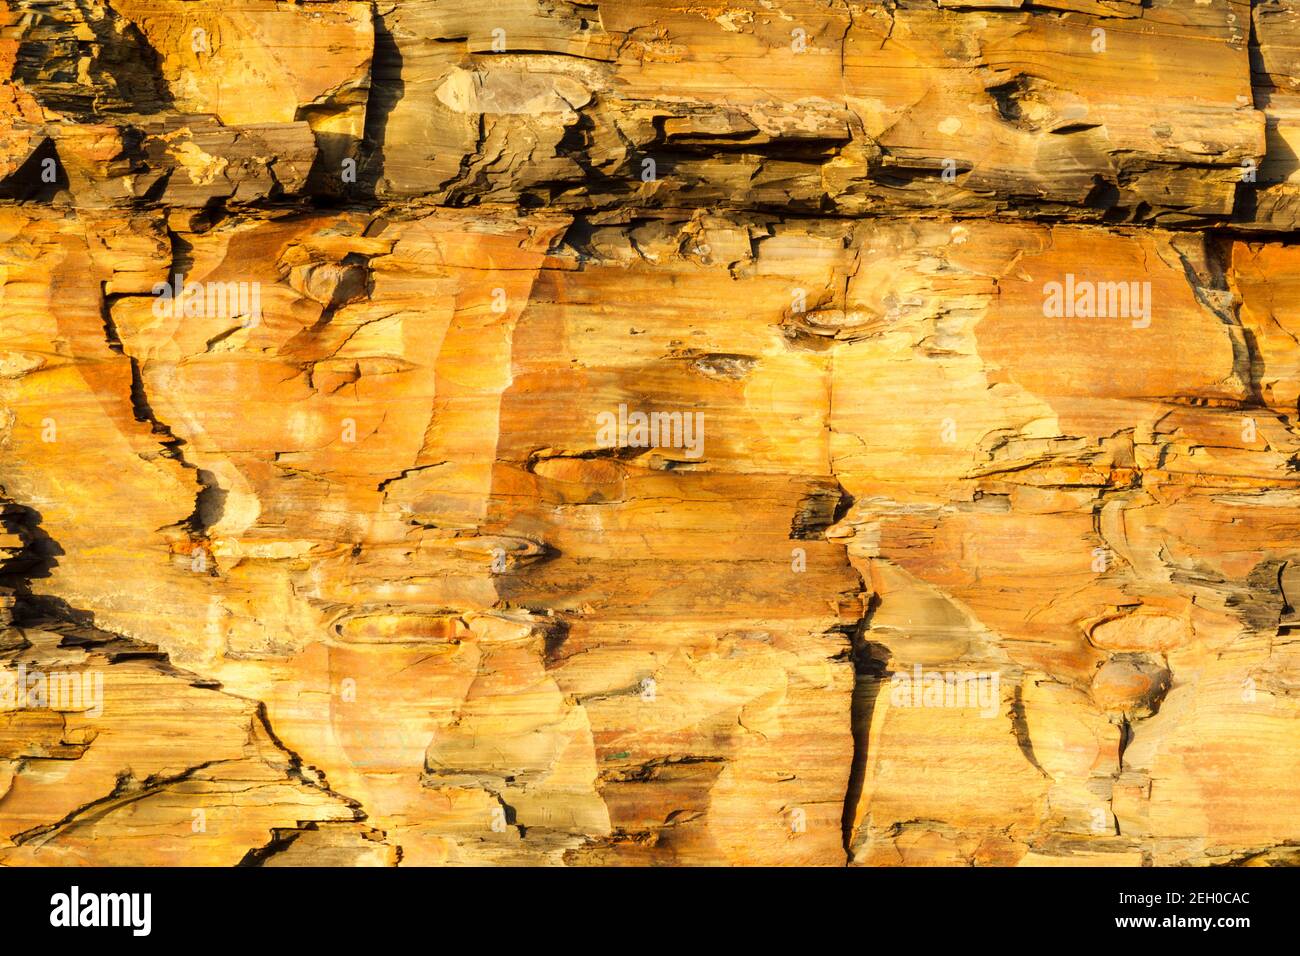 Eroded cliff face made of sedementary deposits and occassional boulders in warm morning light showing rock layers and erosion process on north east co Stock Photo